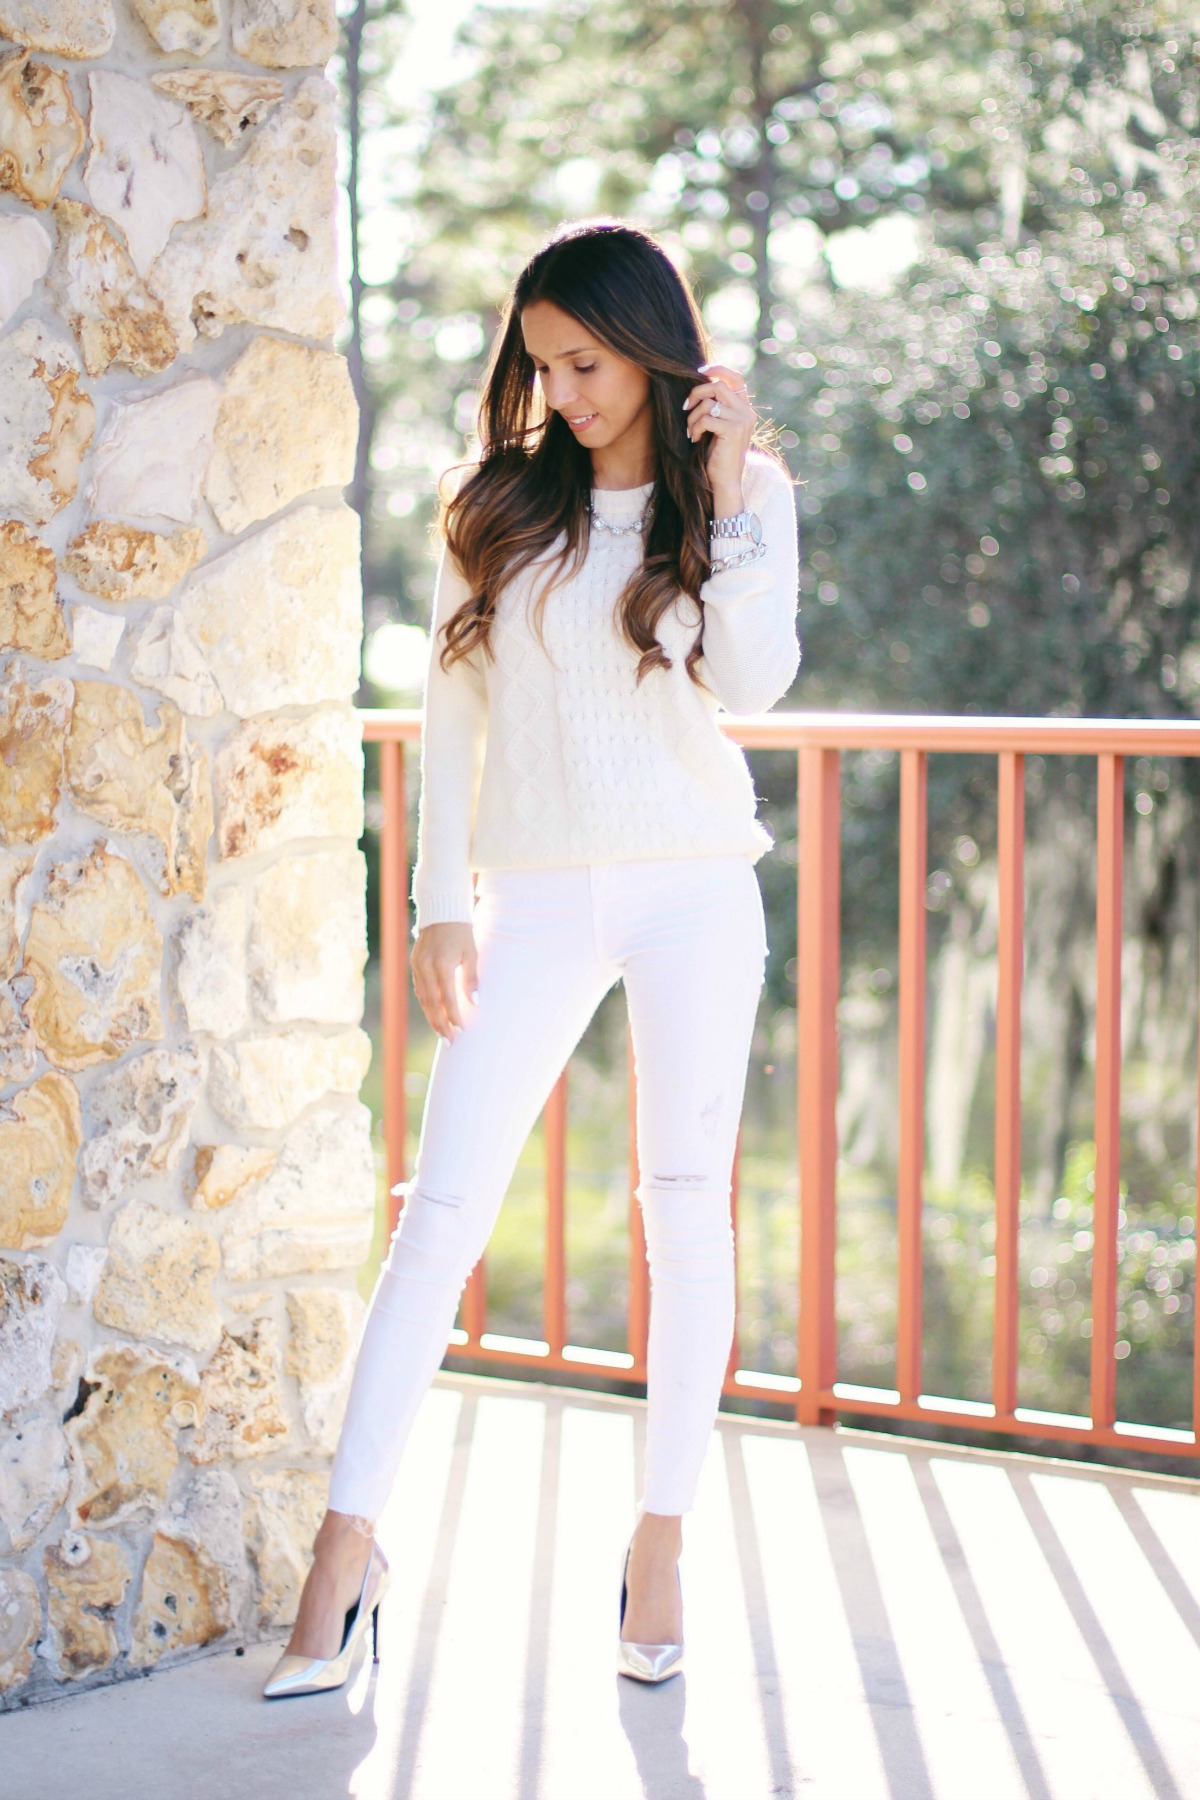 Winter Whites and Metallic Accents